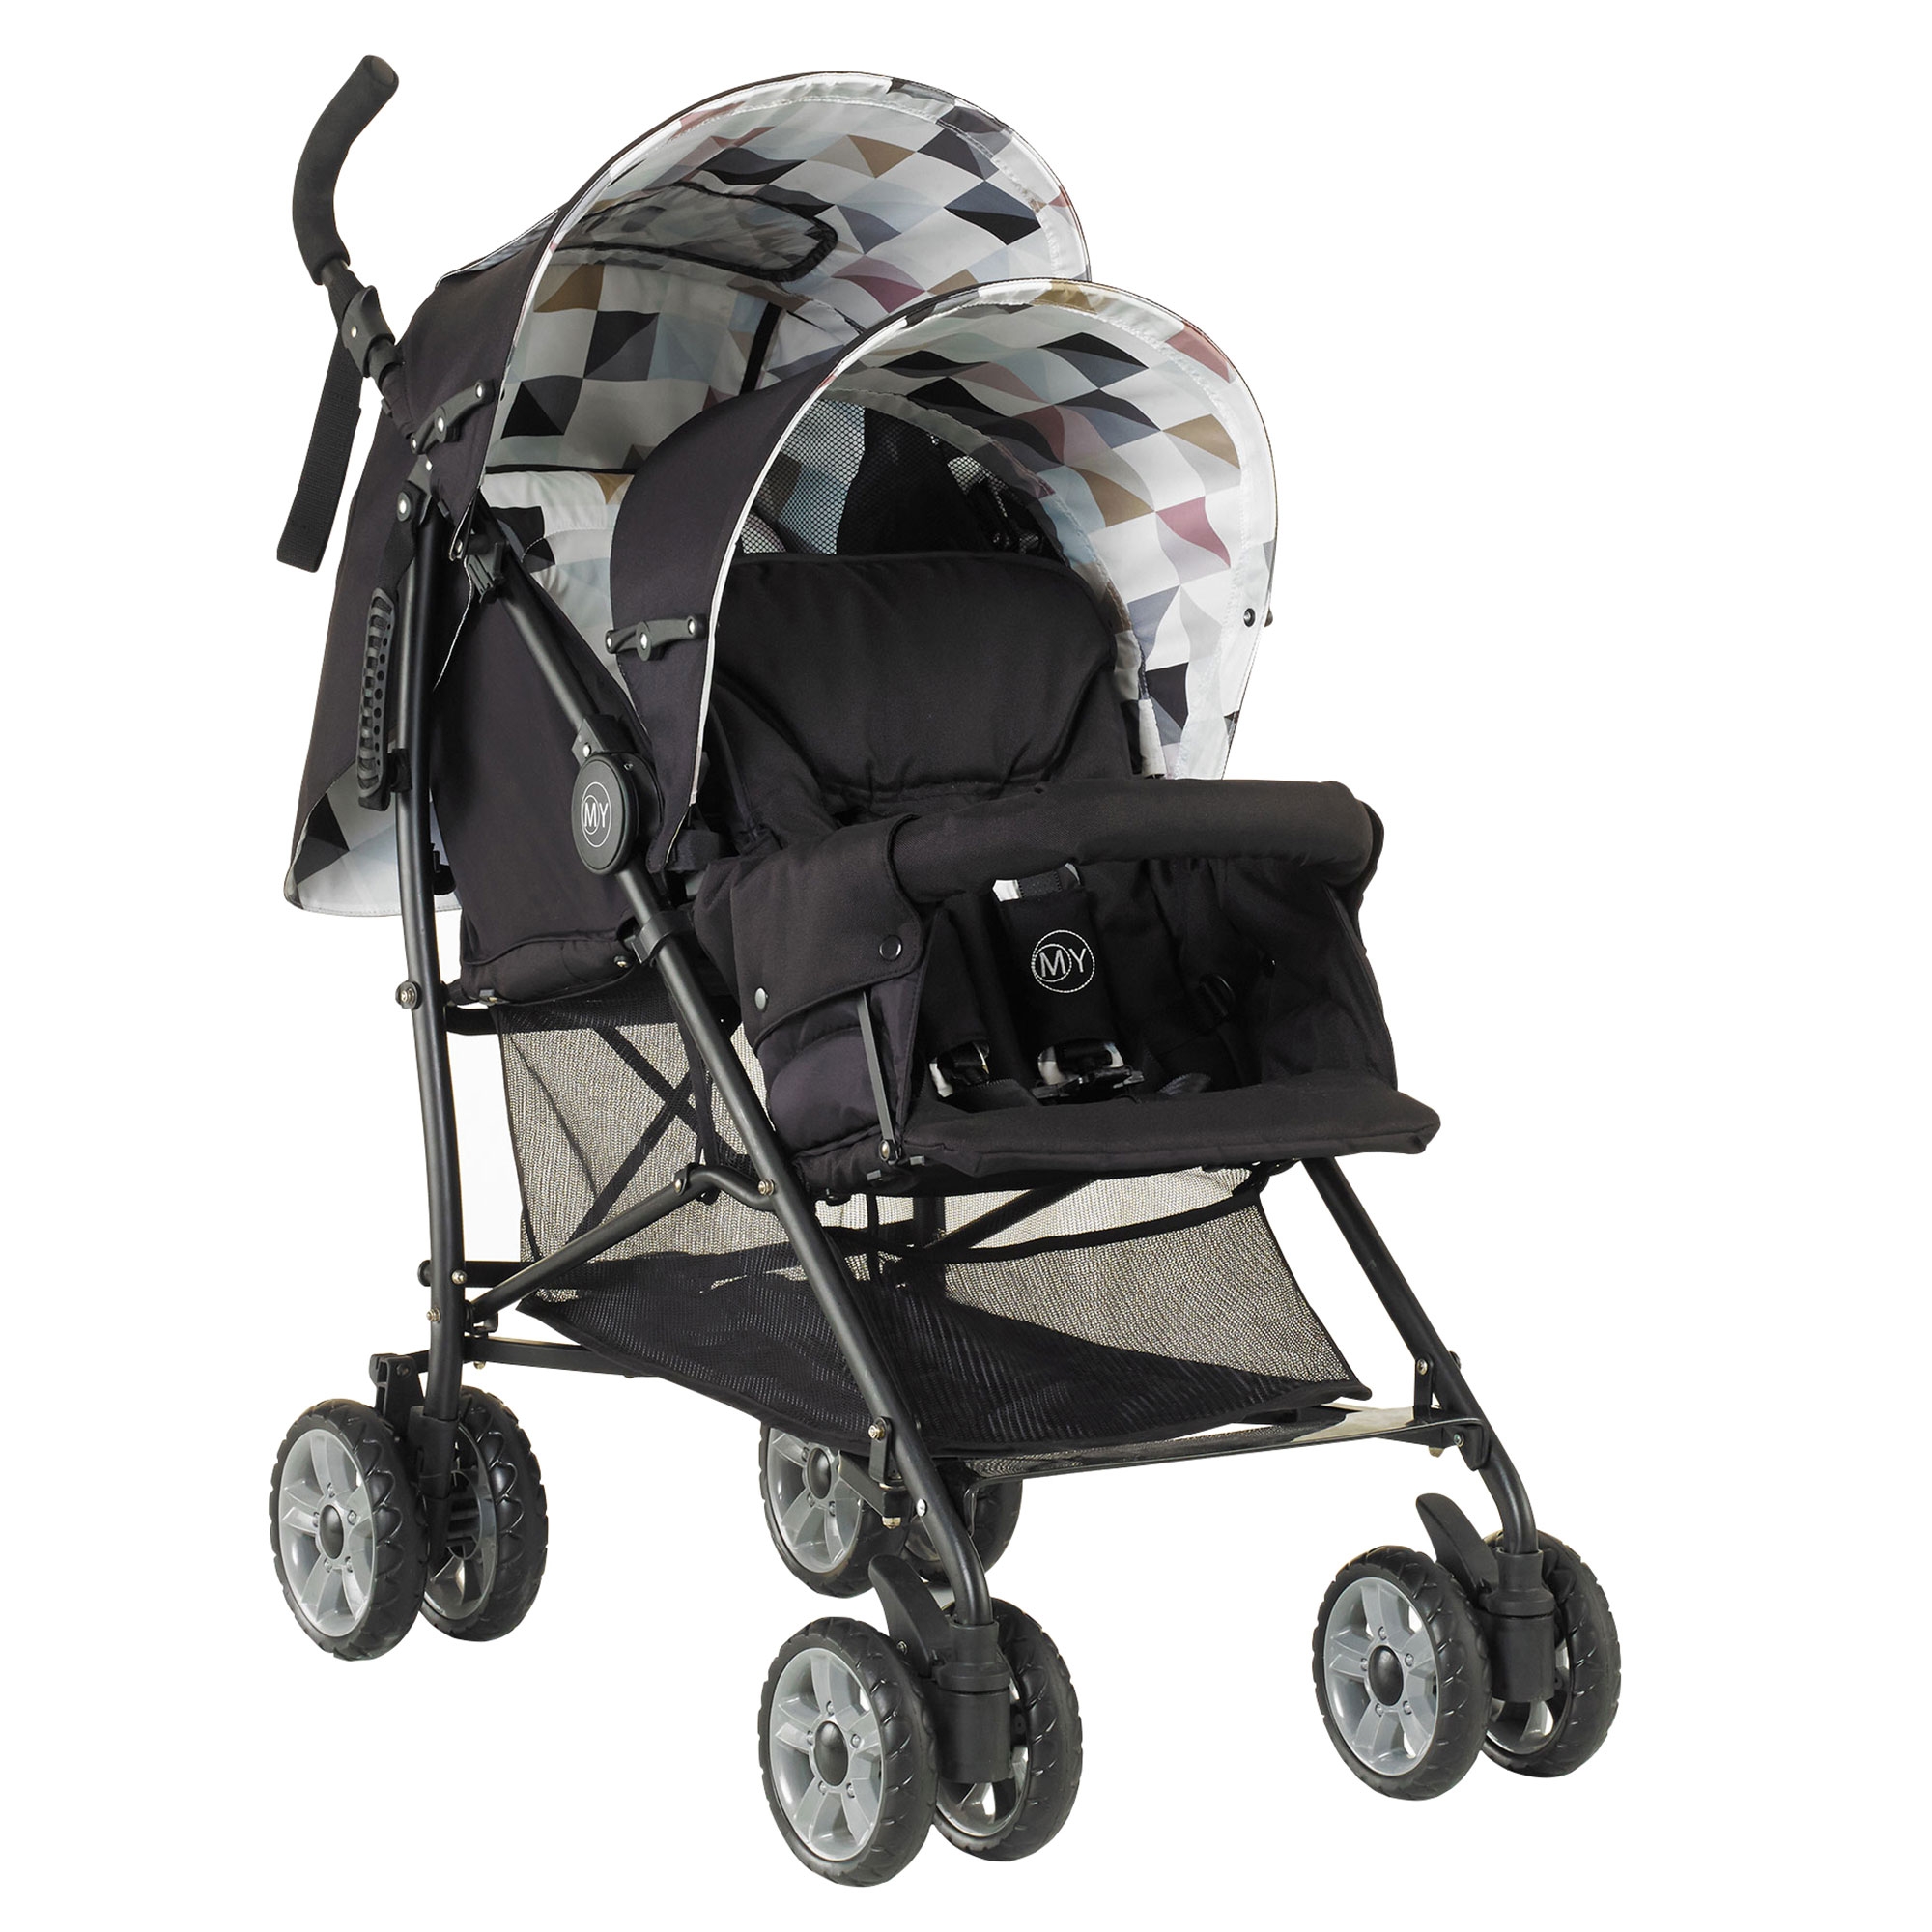 3 wheel double strollers for infant and toddler